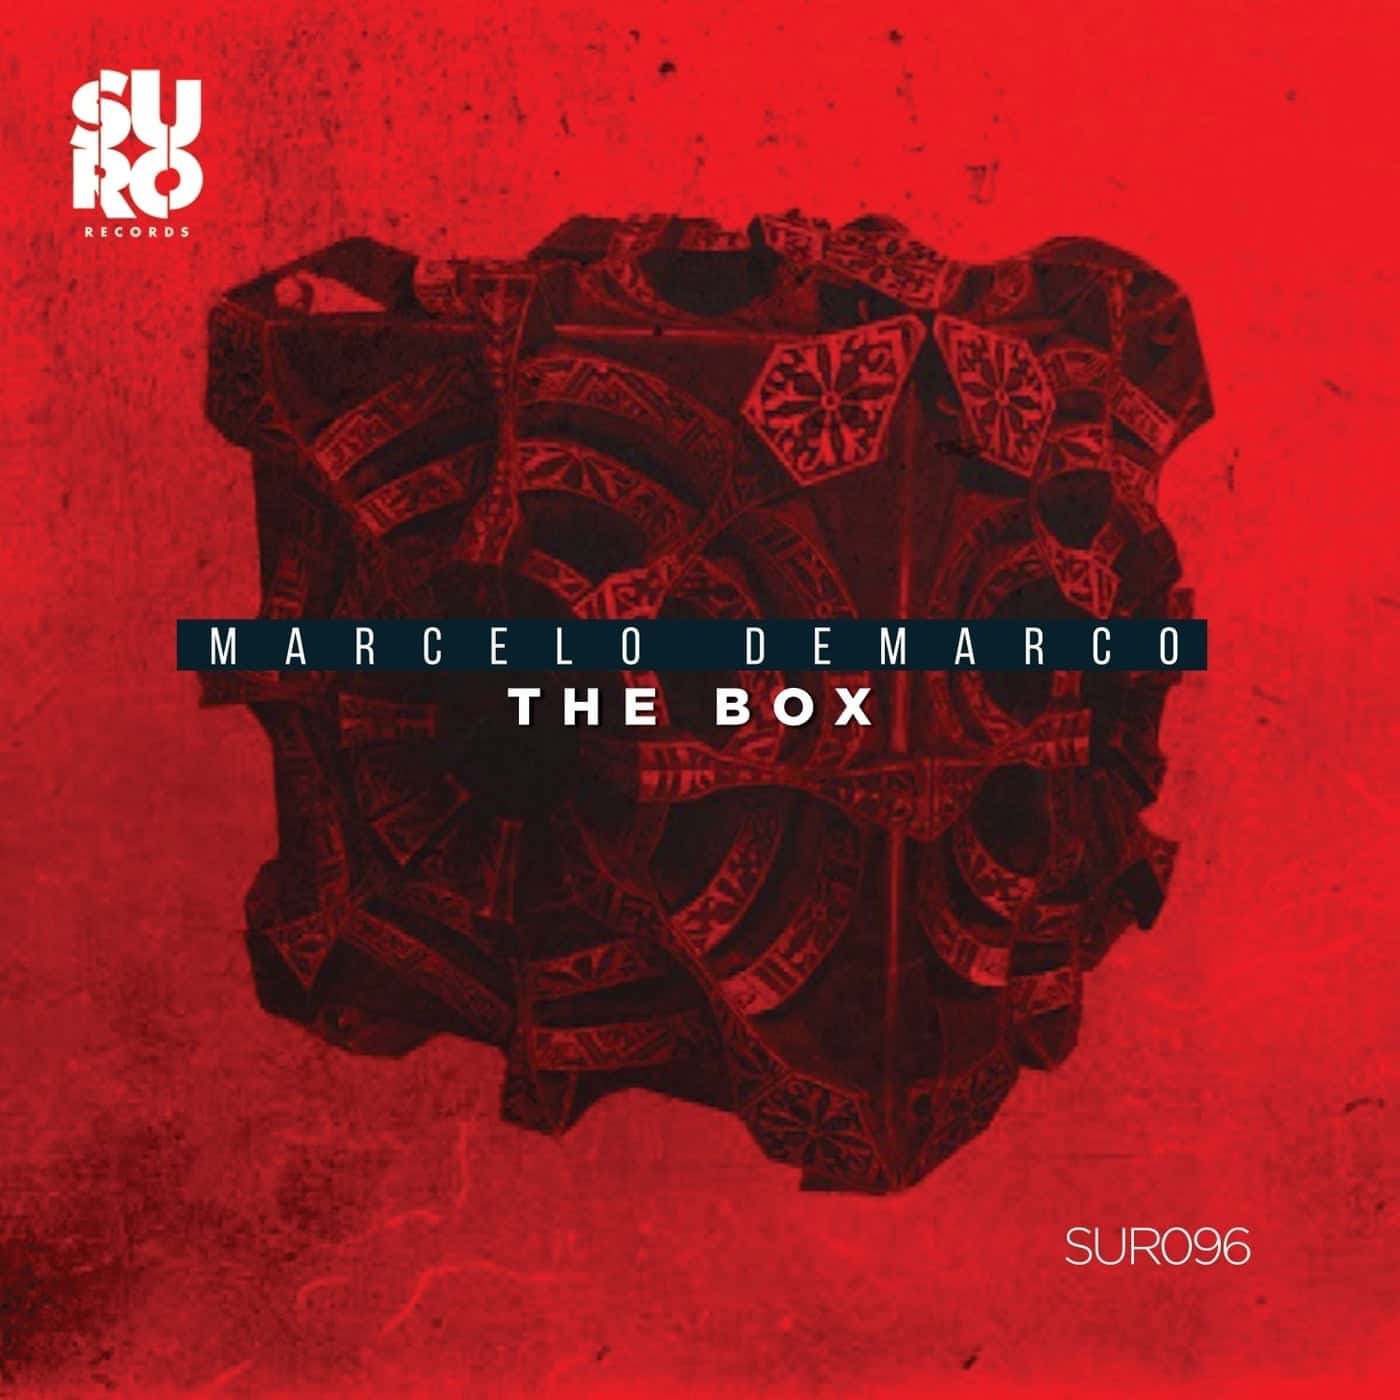 Download Marcelo Demarco - The Box on Electrobuzz